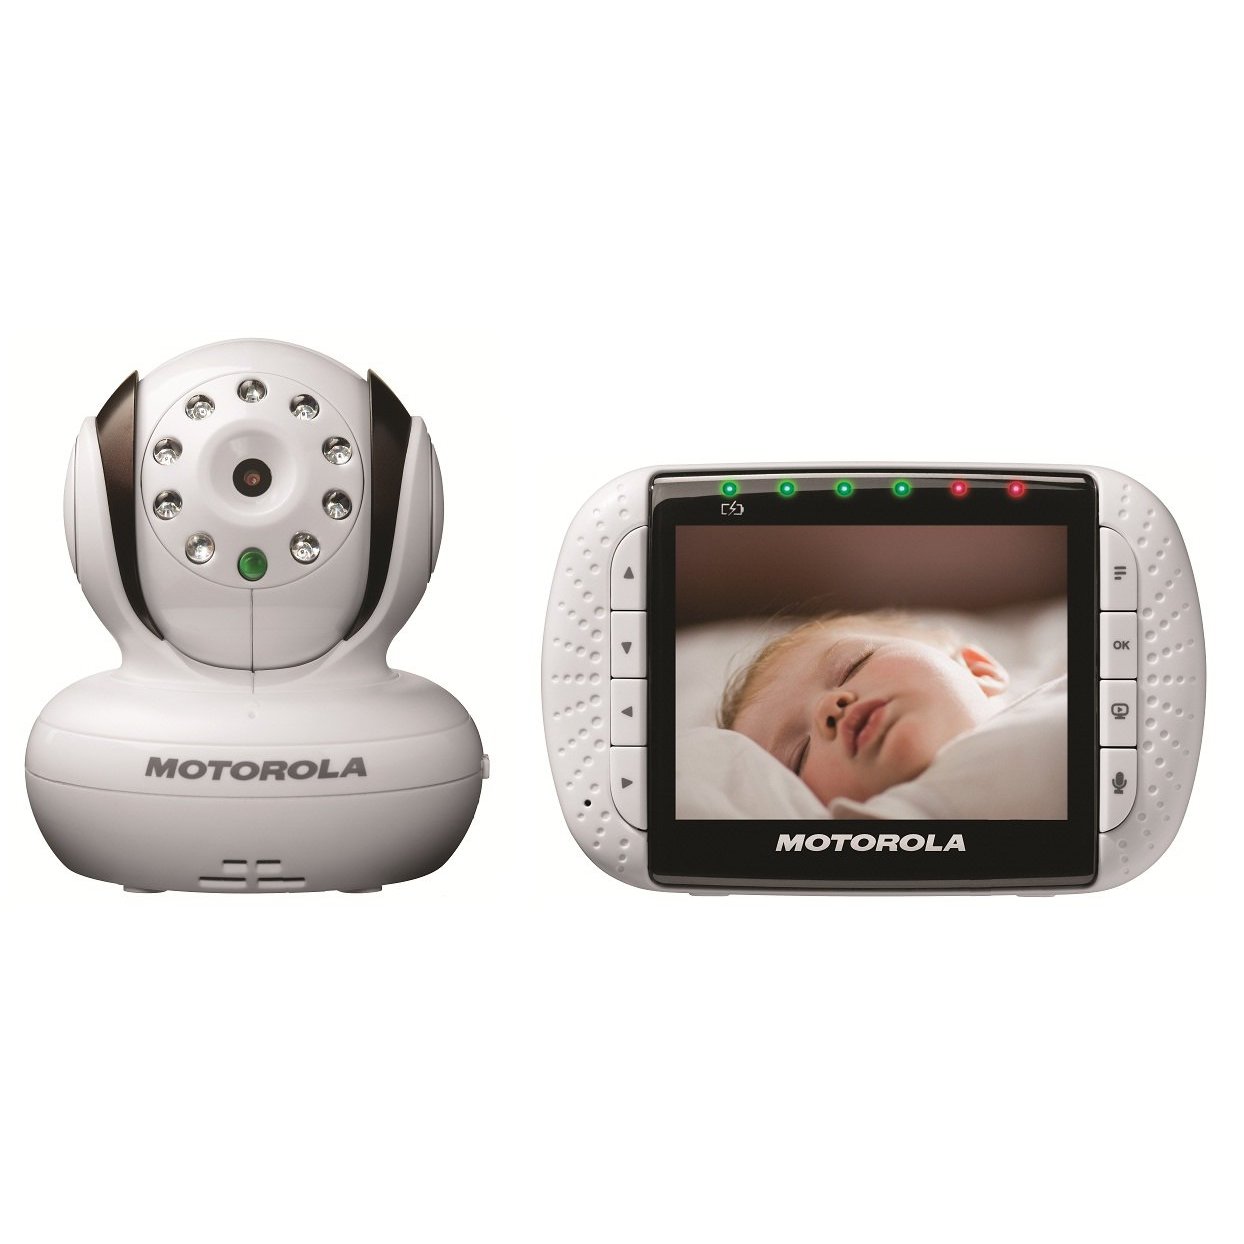 http://thetechjournal.com/wp-content/uploads/images/1110/1318126294-motorola-digital-video-baby-monitor-with-35-inch-color-lcd-screen-2.jpg